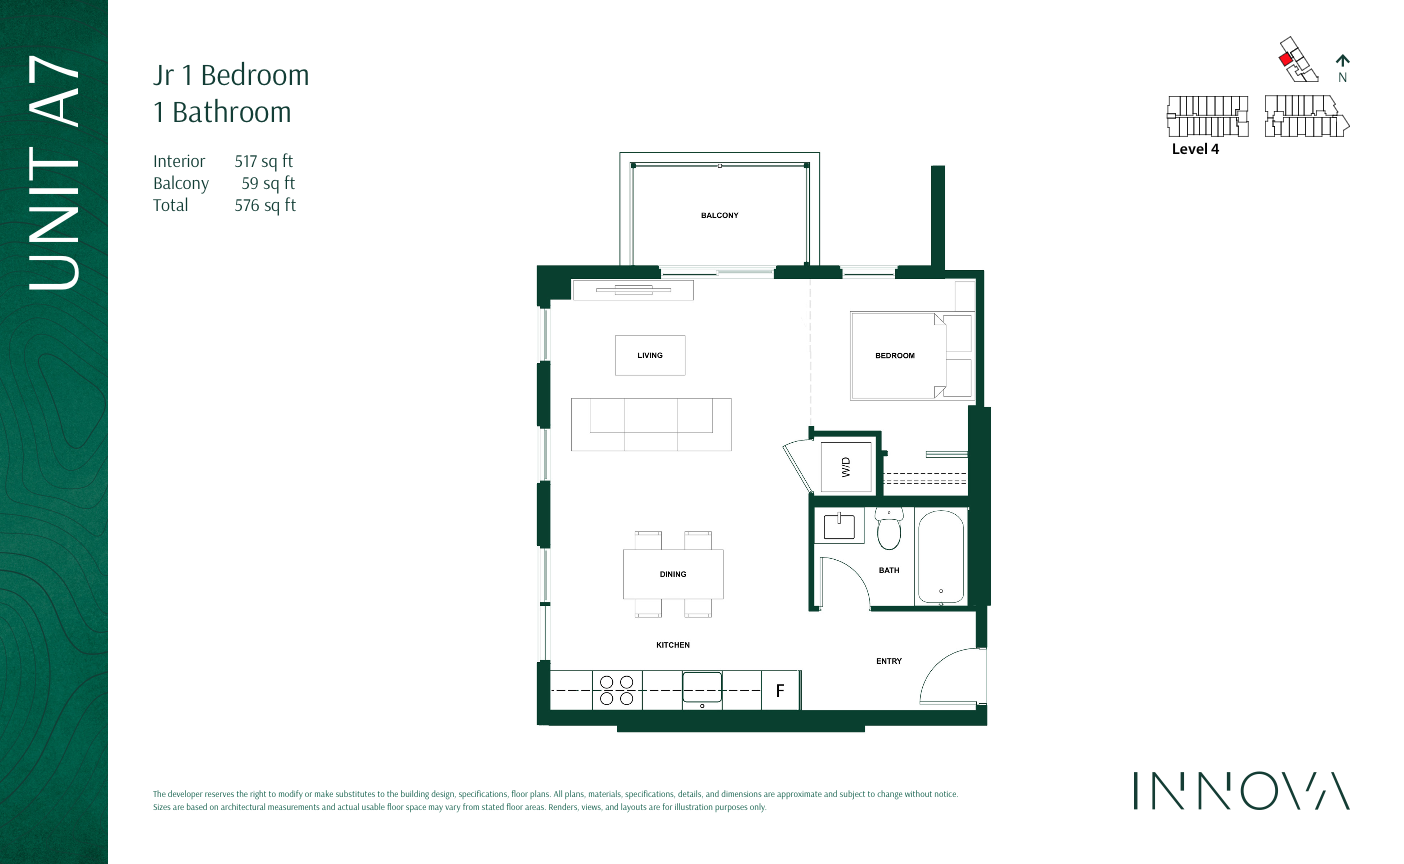  Floor Plan of INNOVA NORTH Condos with undefined beds